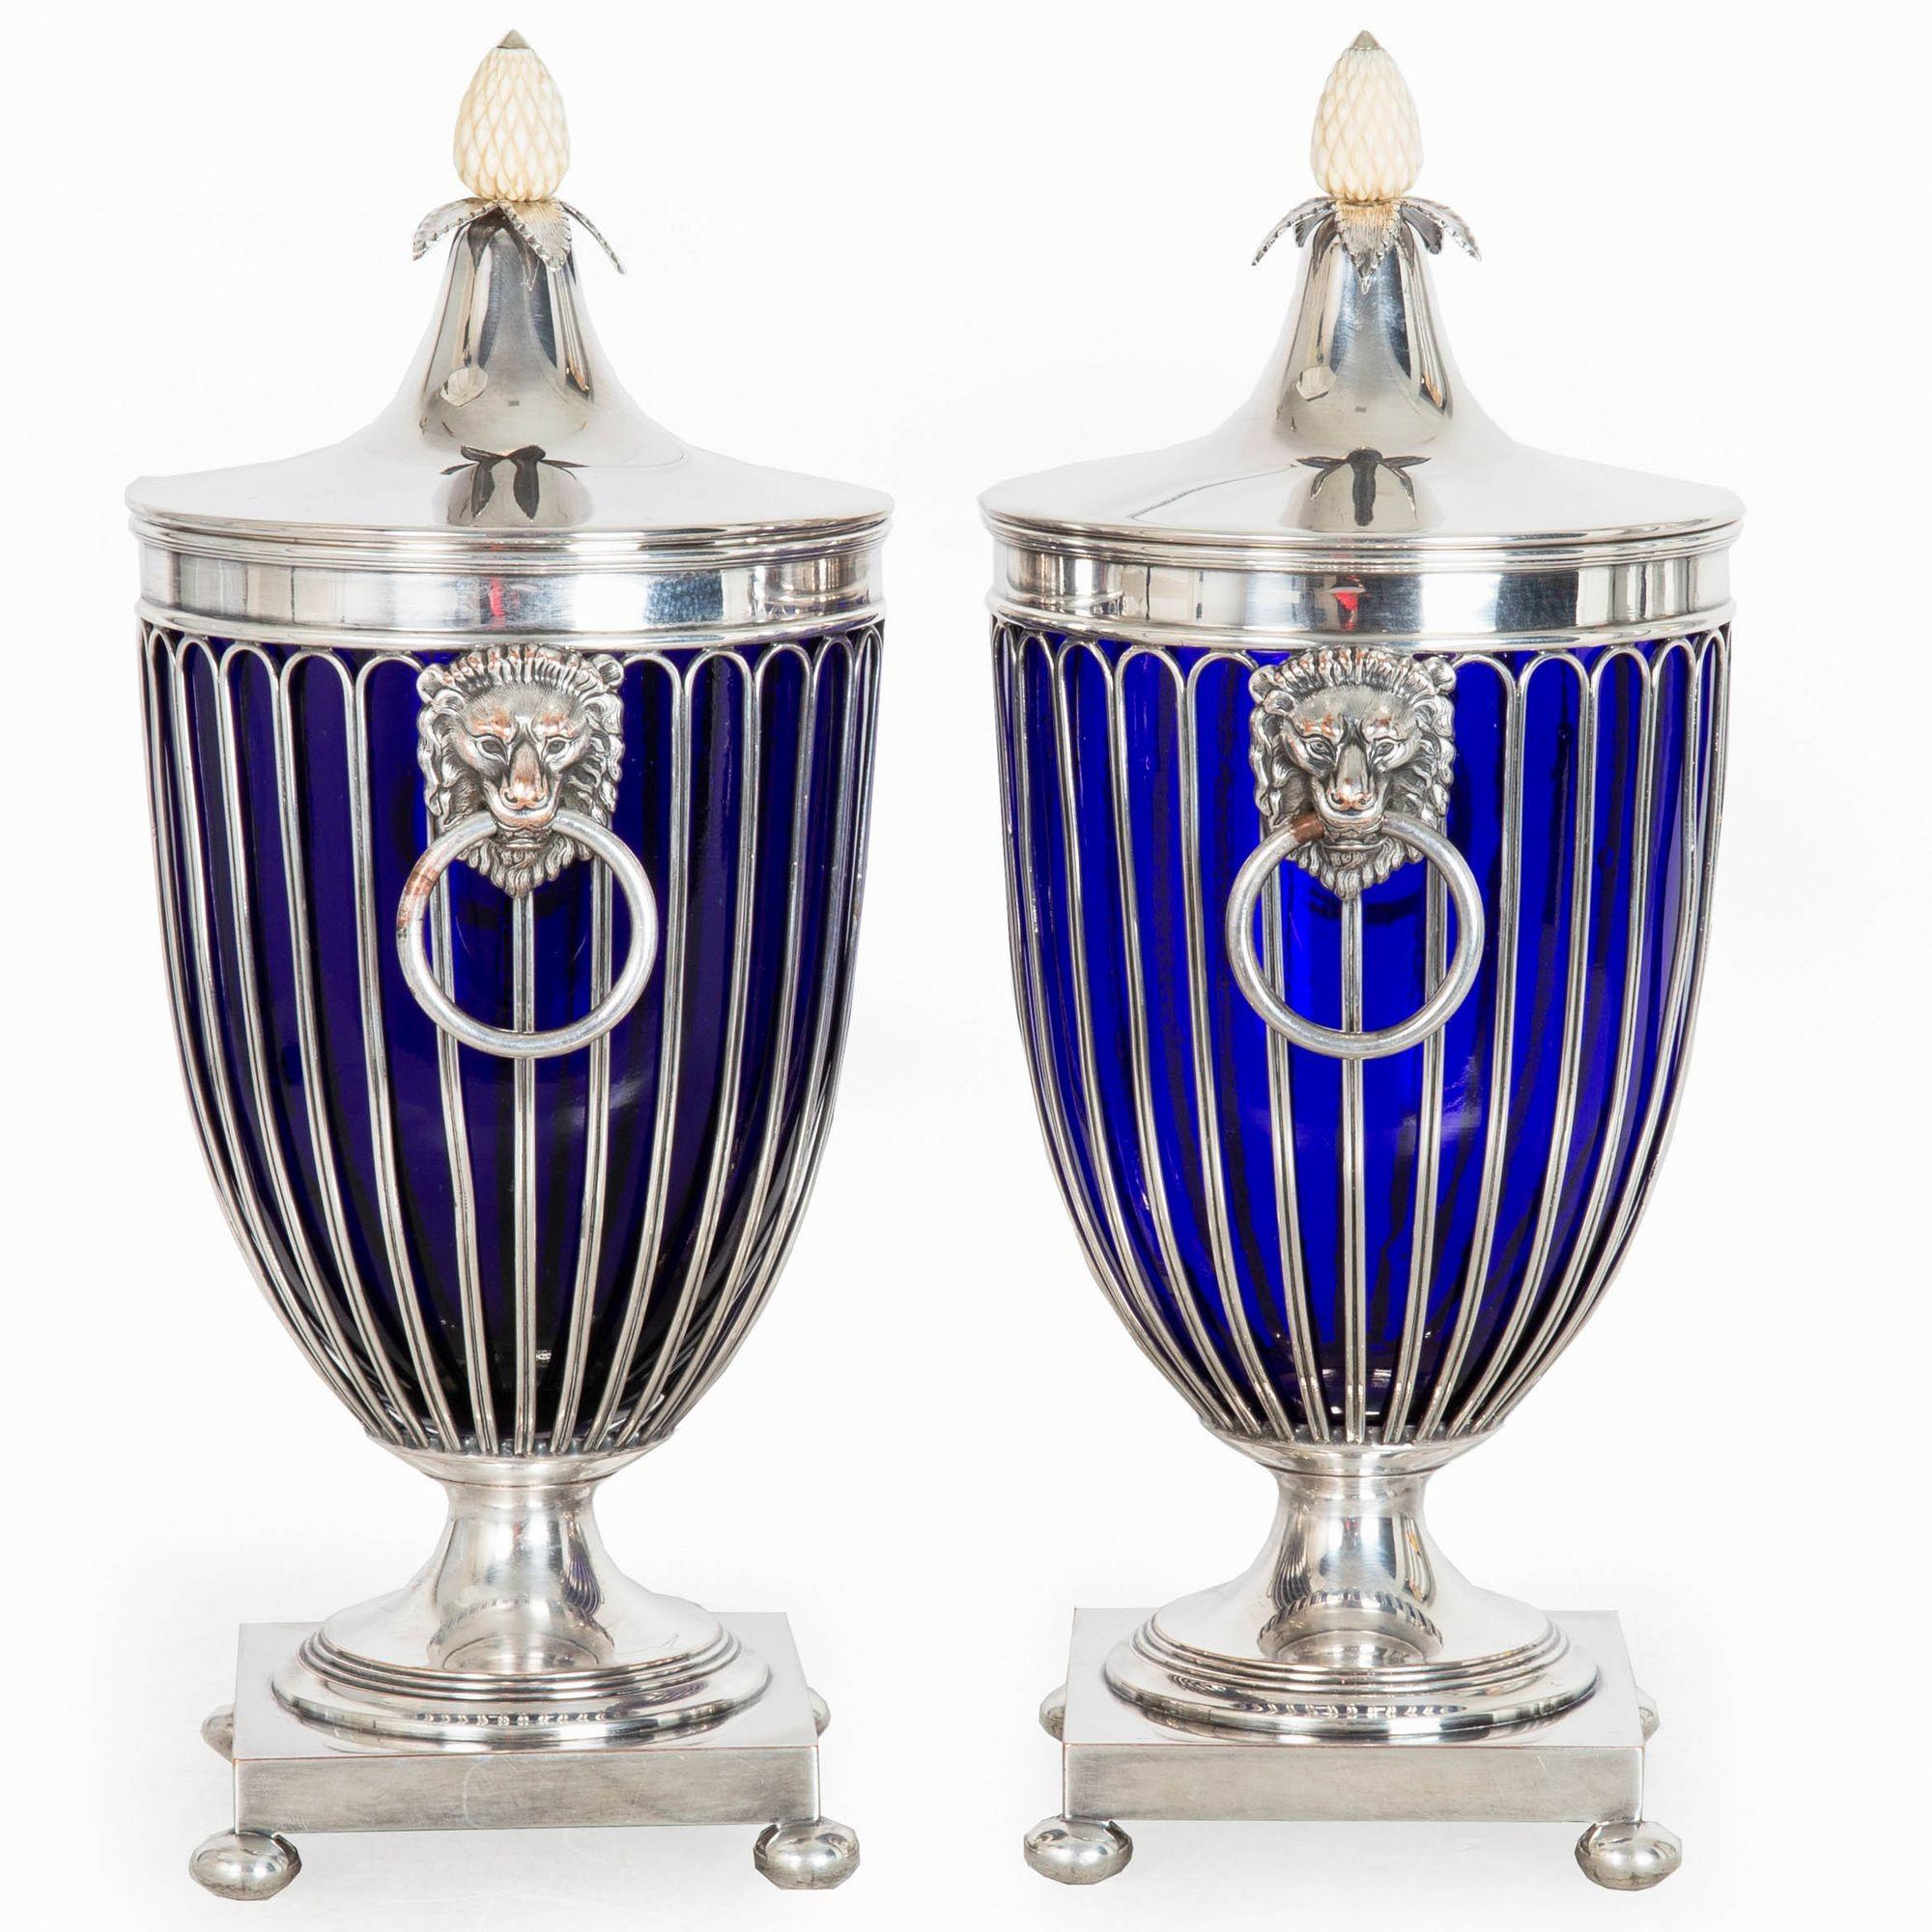 Pair of English Sheffield Silver Plated Cobalt Blue Glass Urns by Barker-Ellis In Good Condition For Sale In Shippensburg, PA